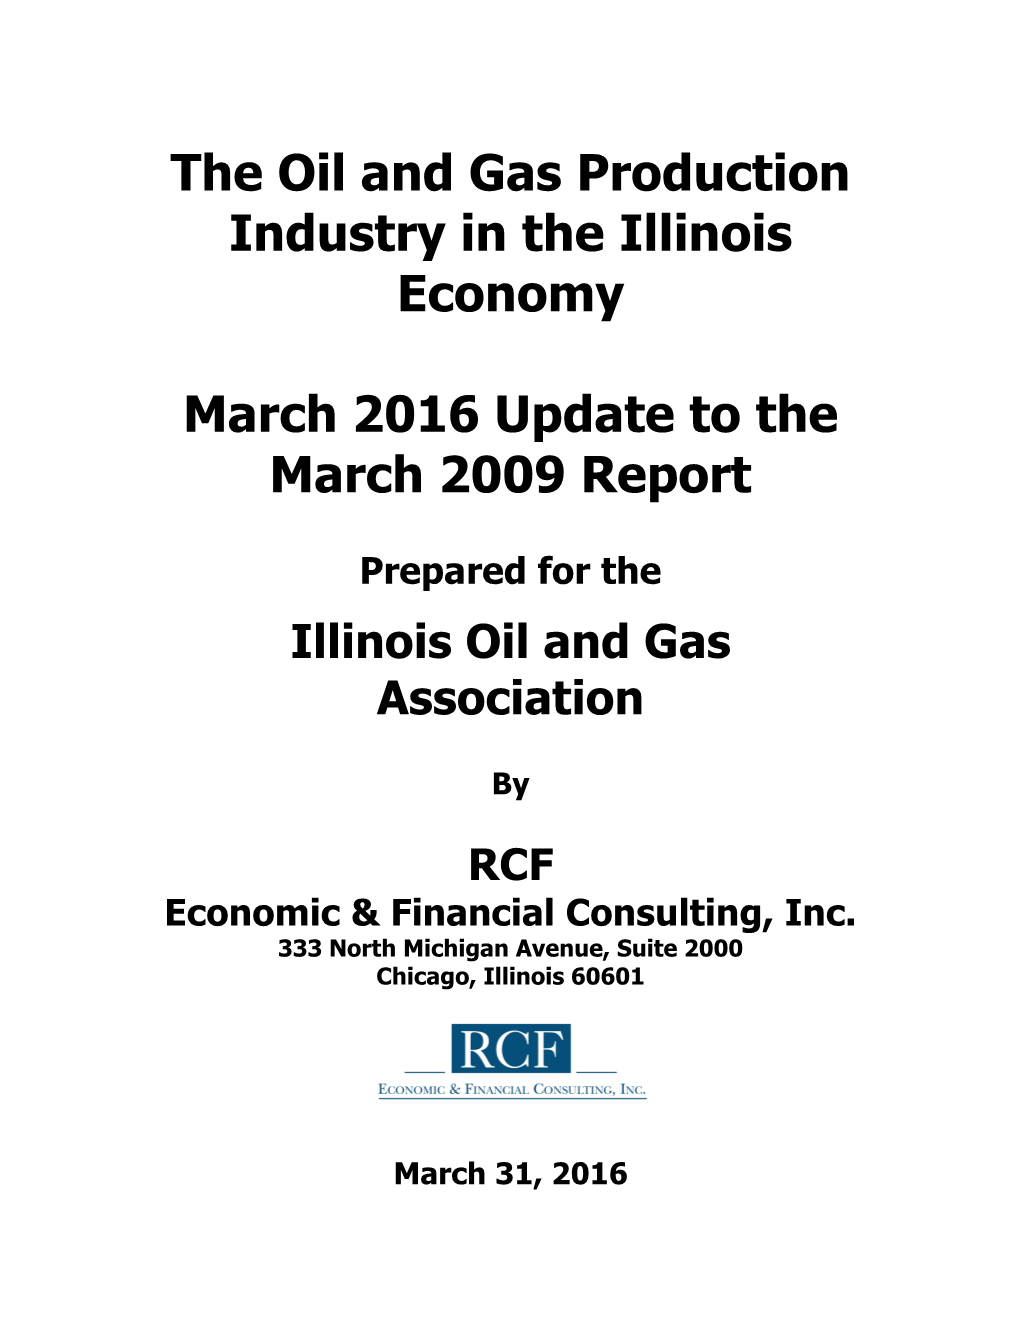 The Oil and Gas Production Industry in the Illinois Economy March 2016 Update to the March 2009 Report